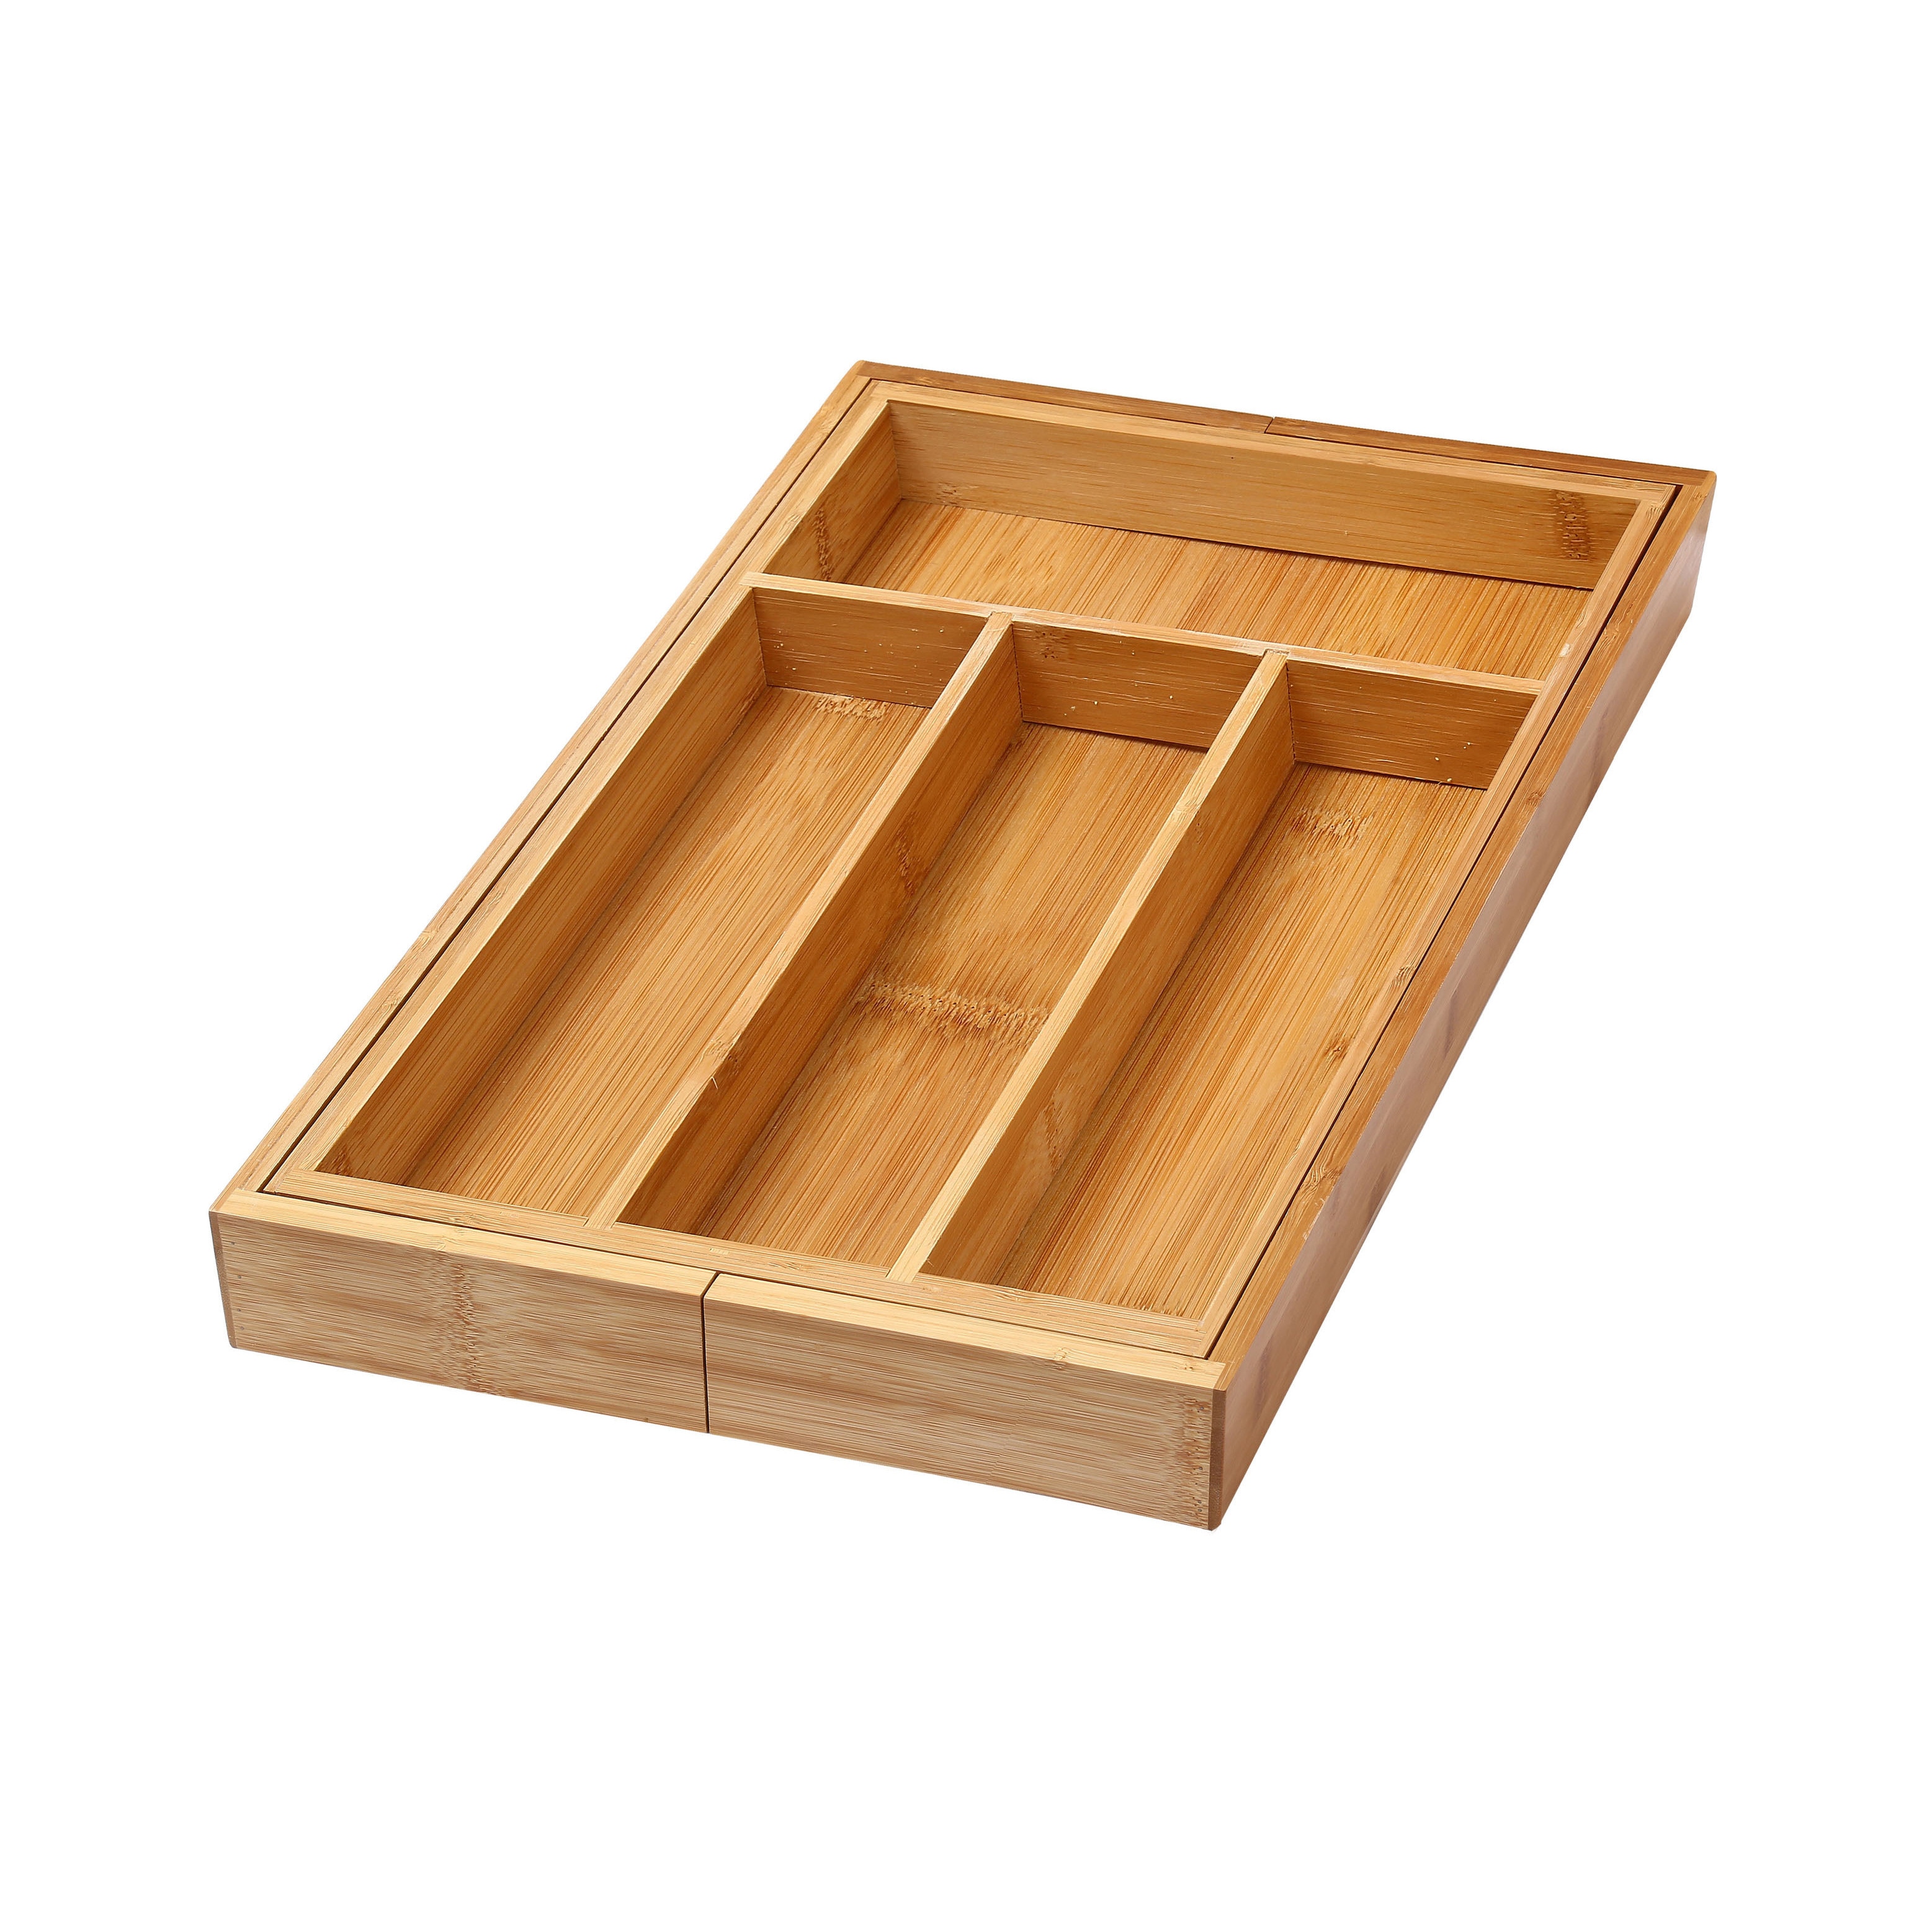 Seville Classics 4-piece Bamboo Expandable Drawer Organizer